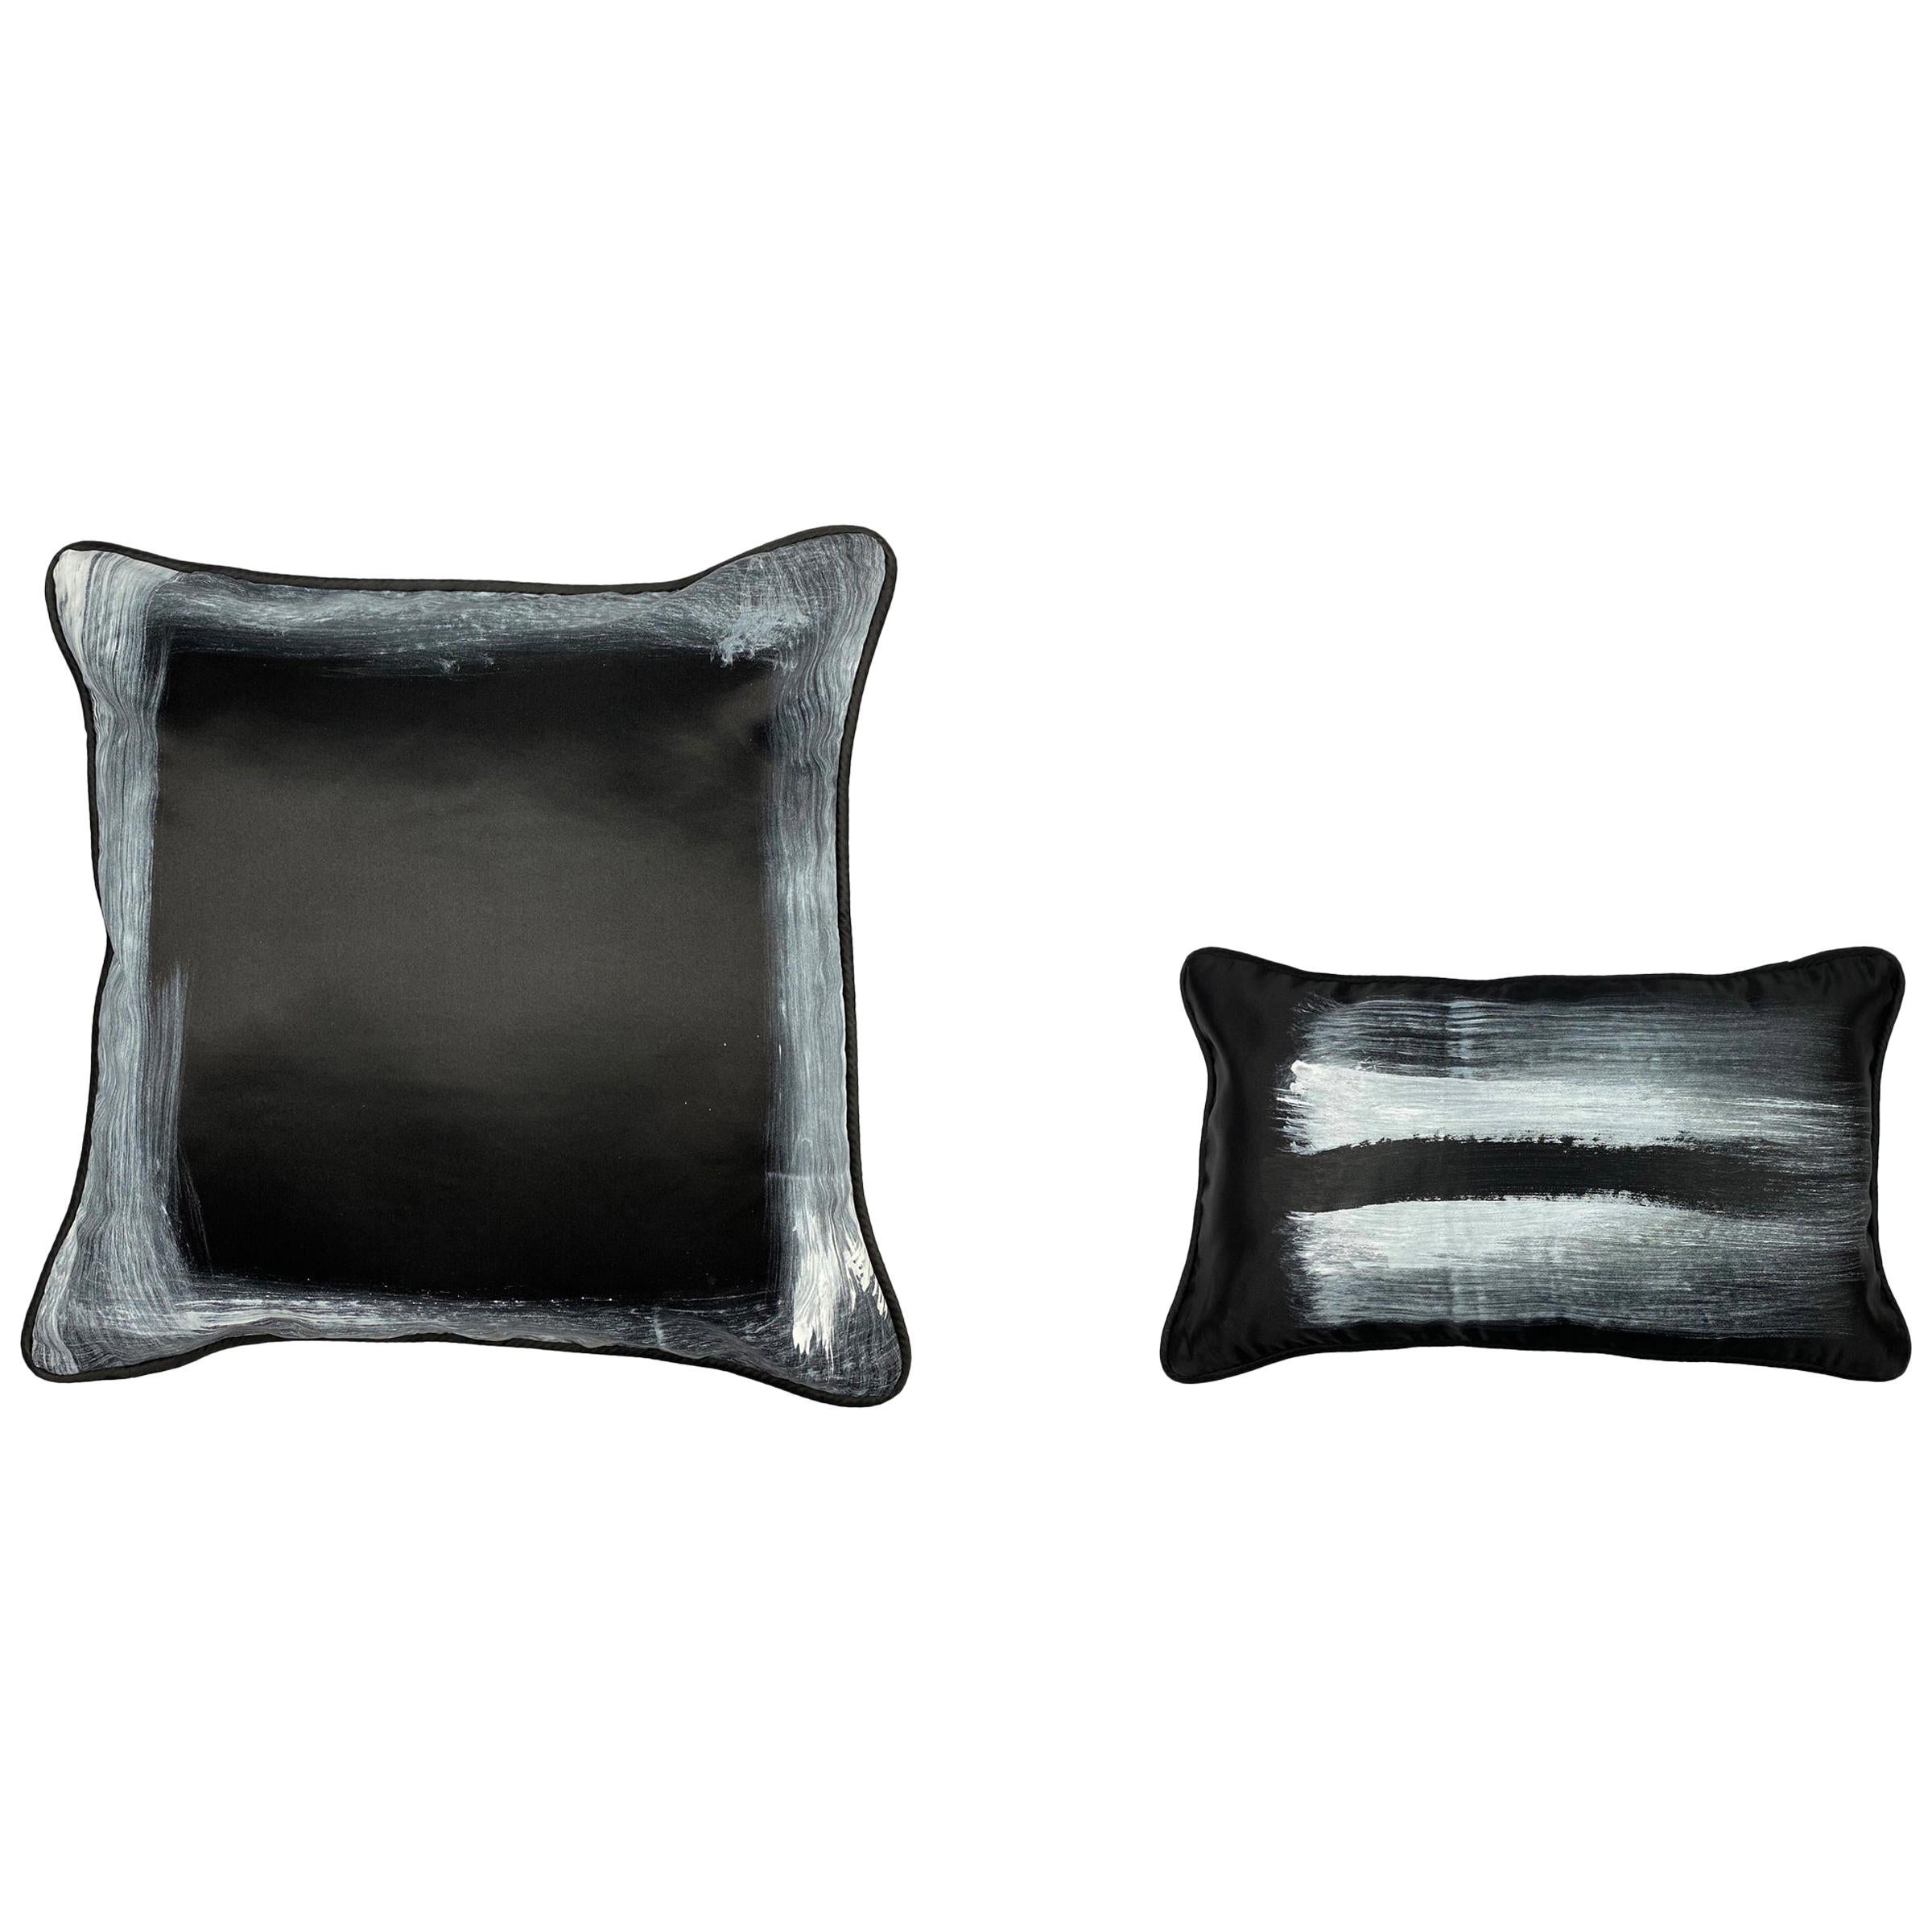 Black Contemporary Delicately Hand-Painted White-Edged Throw Pillows